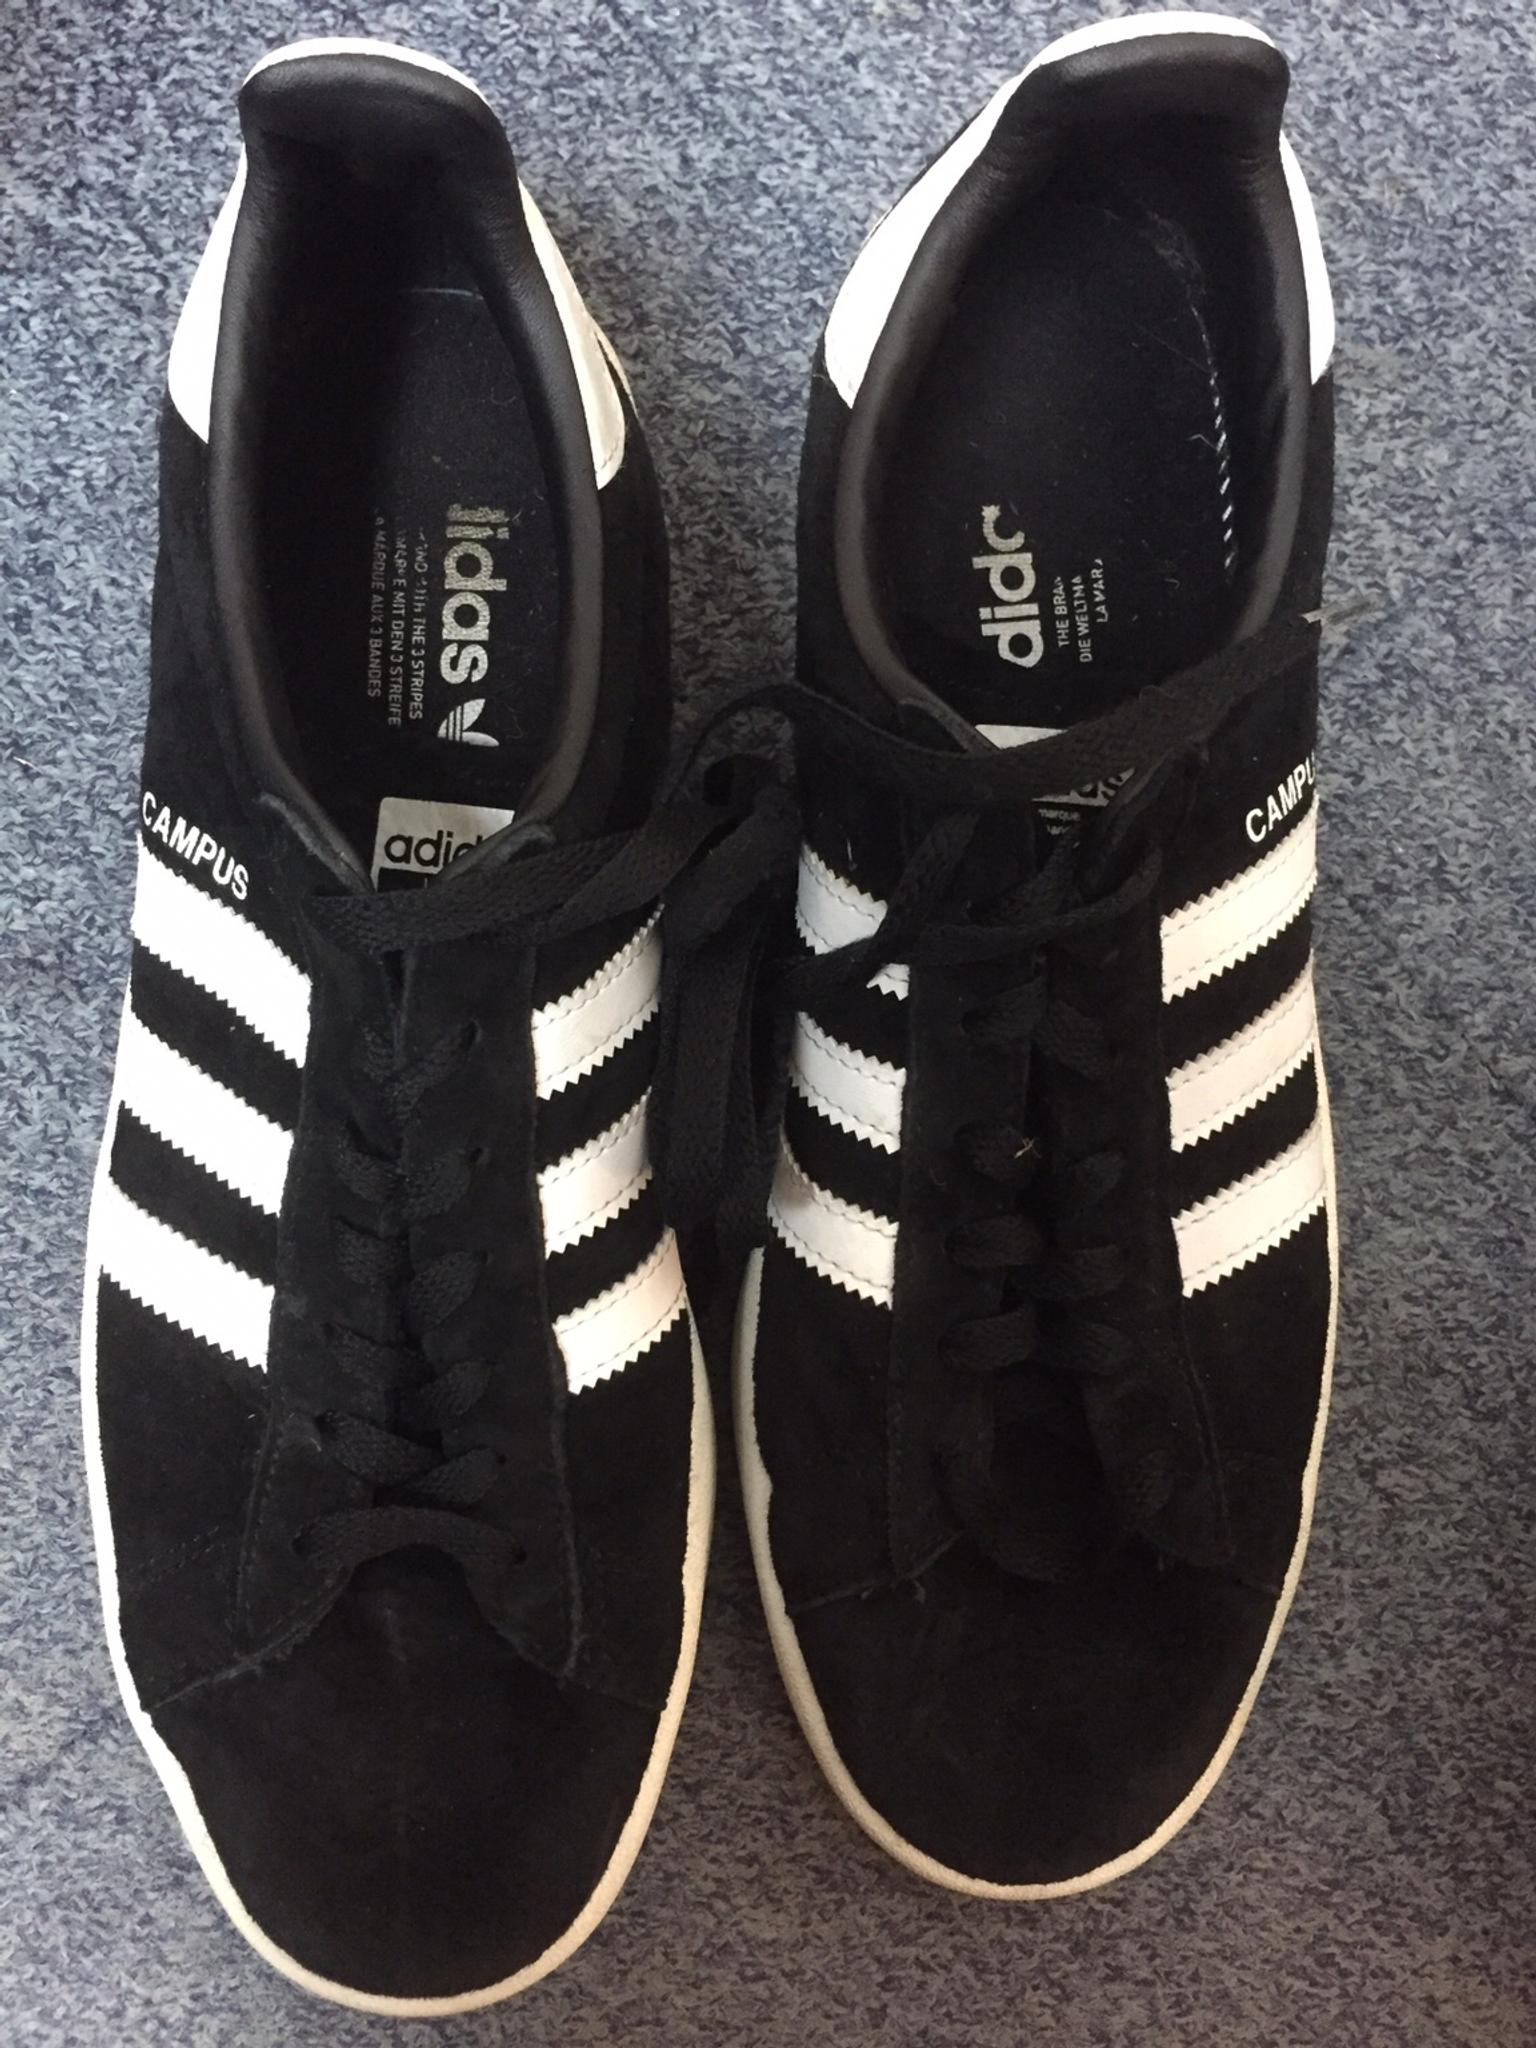 Adidas/ Campus shoes size 9 in NW7 London for £6.50 for sale | Shpock